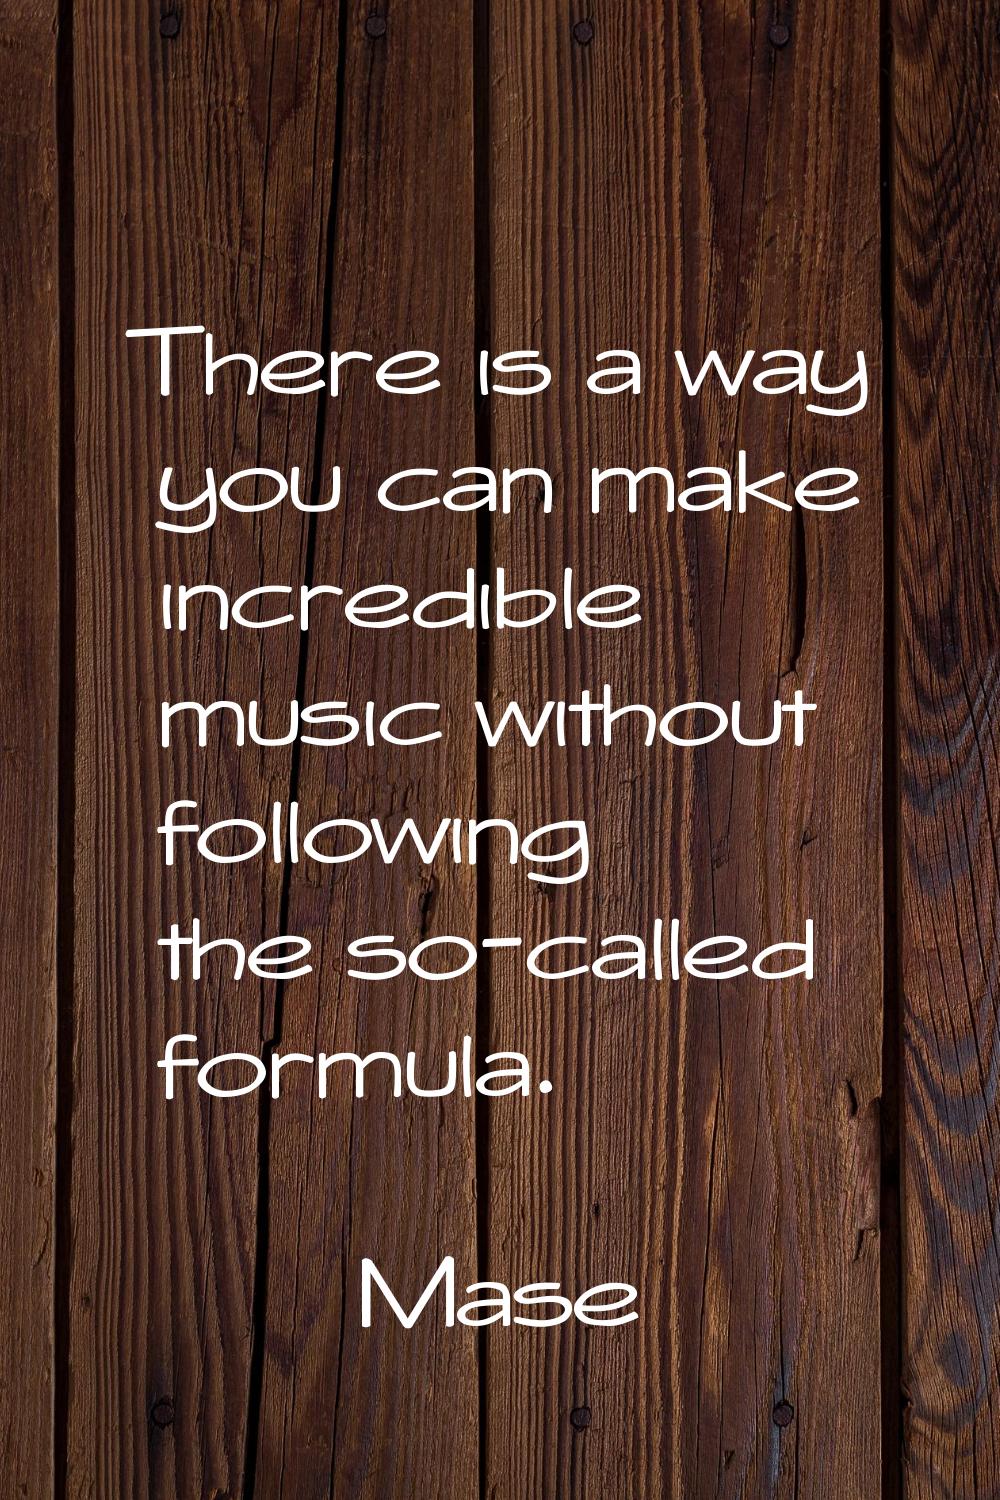 There is a way you can make incredible music without following the so-called formula.